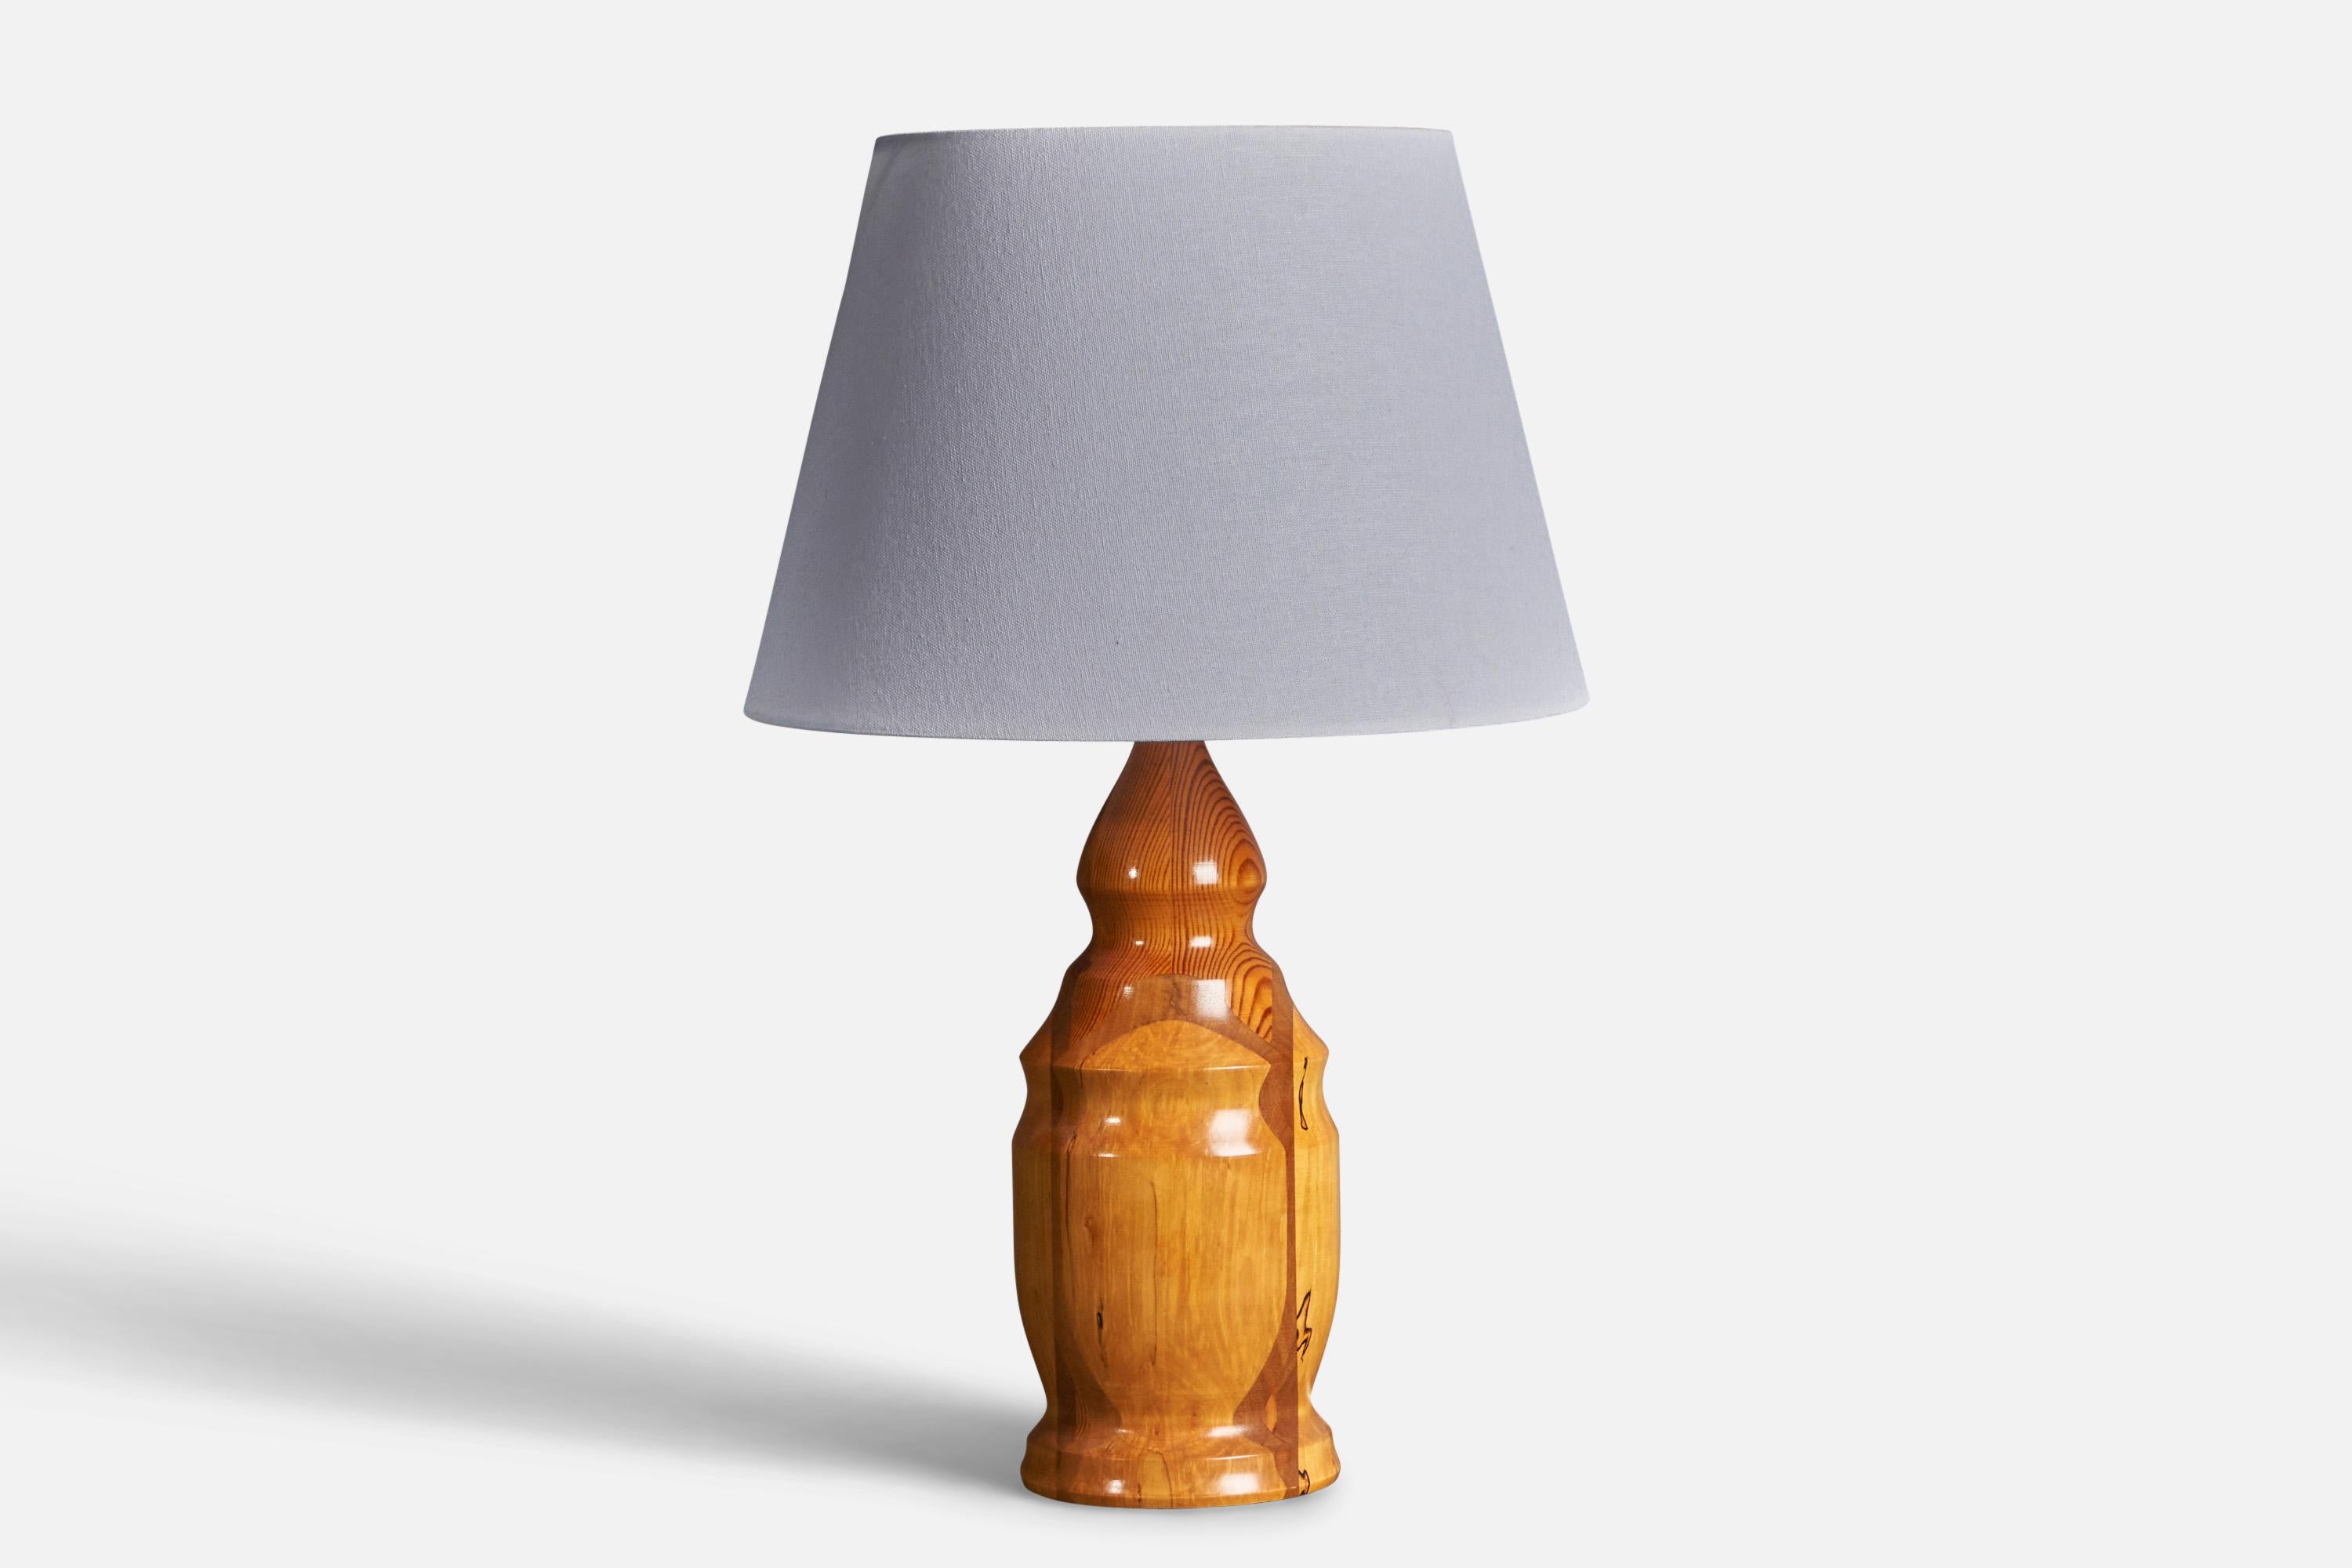 Late 20th Century Swedish Craftsman, Table Lamp, Solid Joined Pine, Birch, Mahogany, Sweden, 1985 For Sale